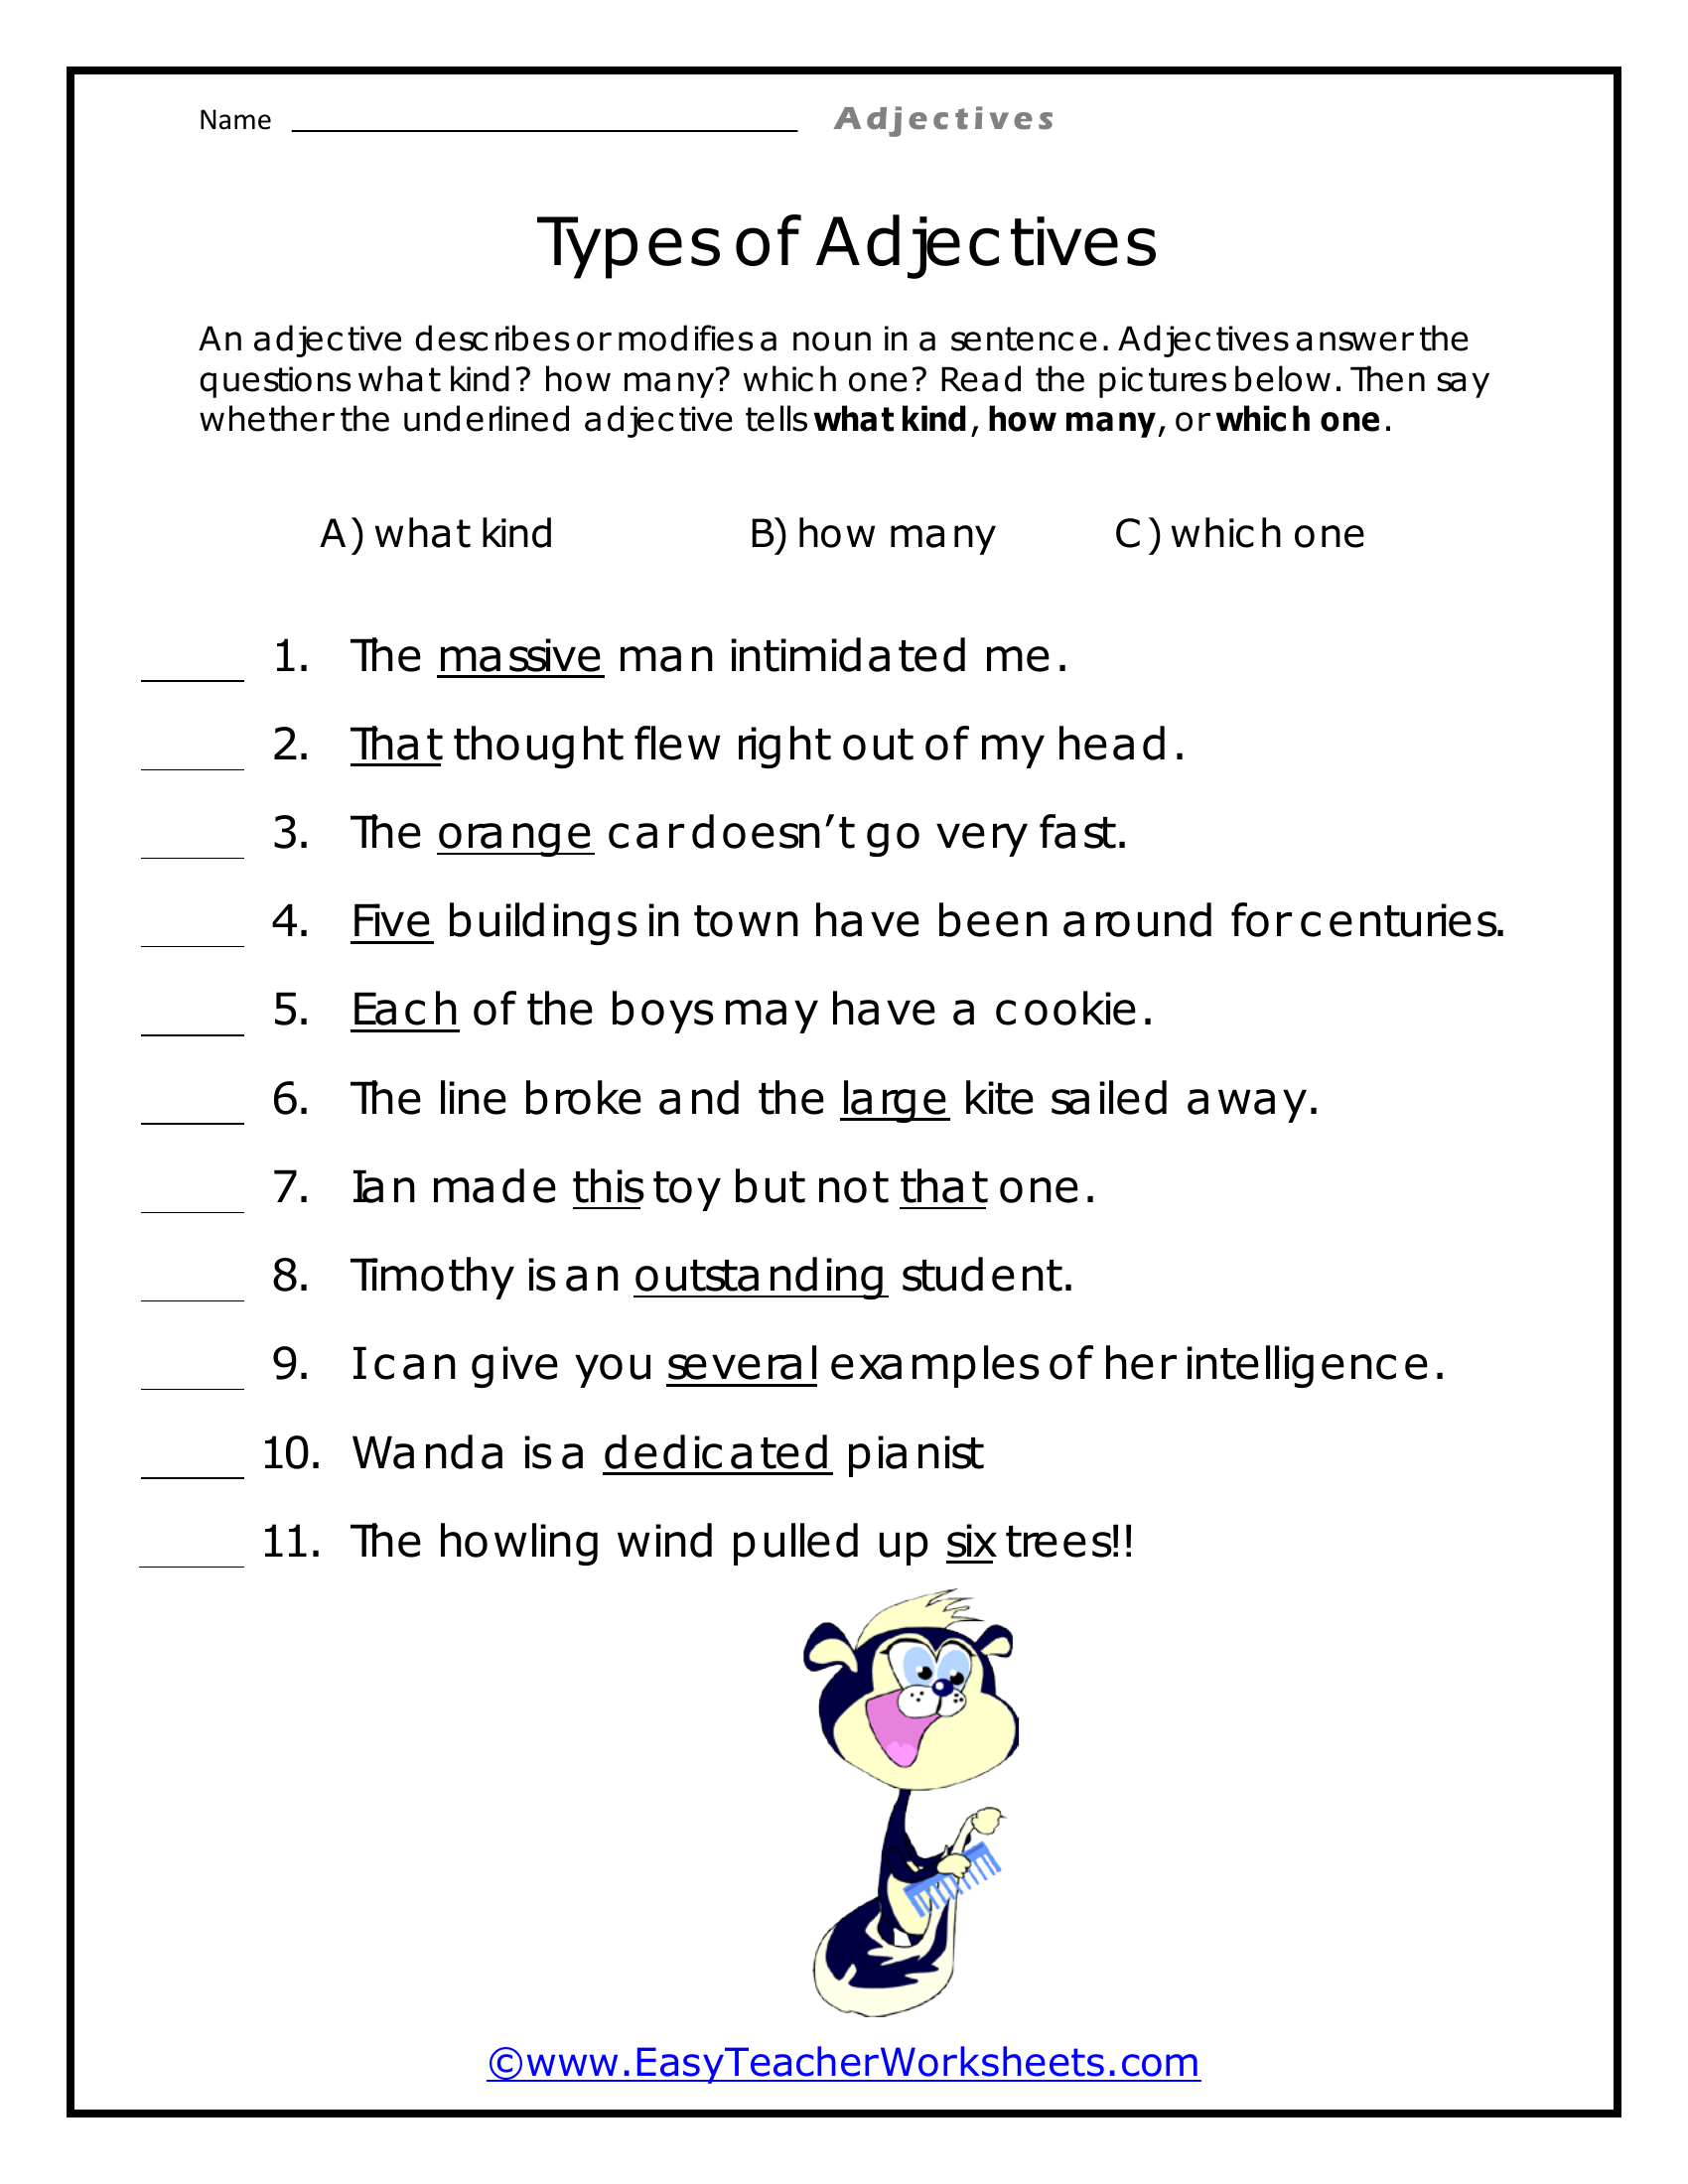 types-of-adjectives-worksheet-zone